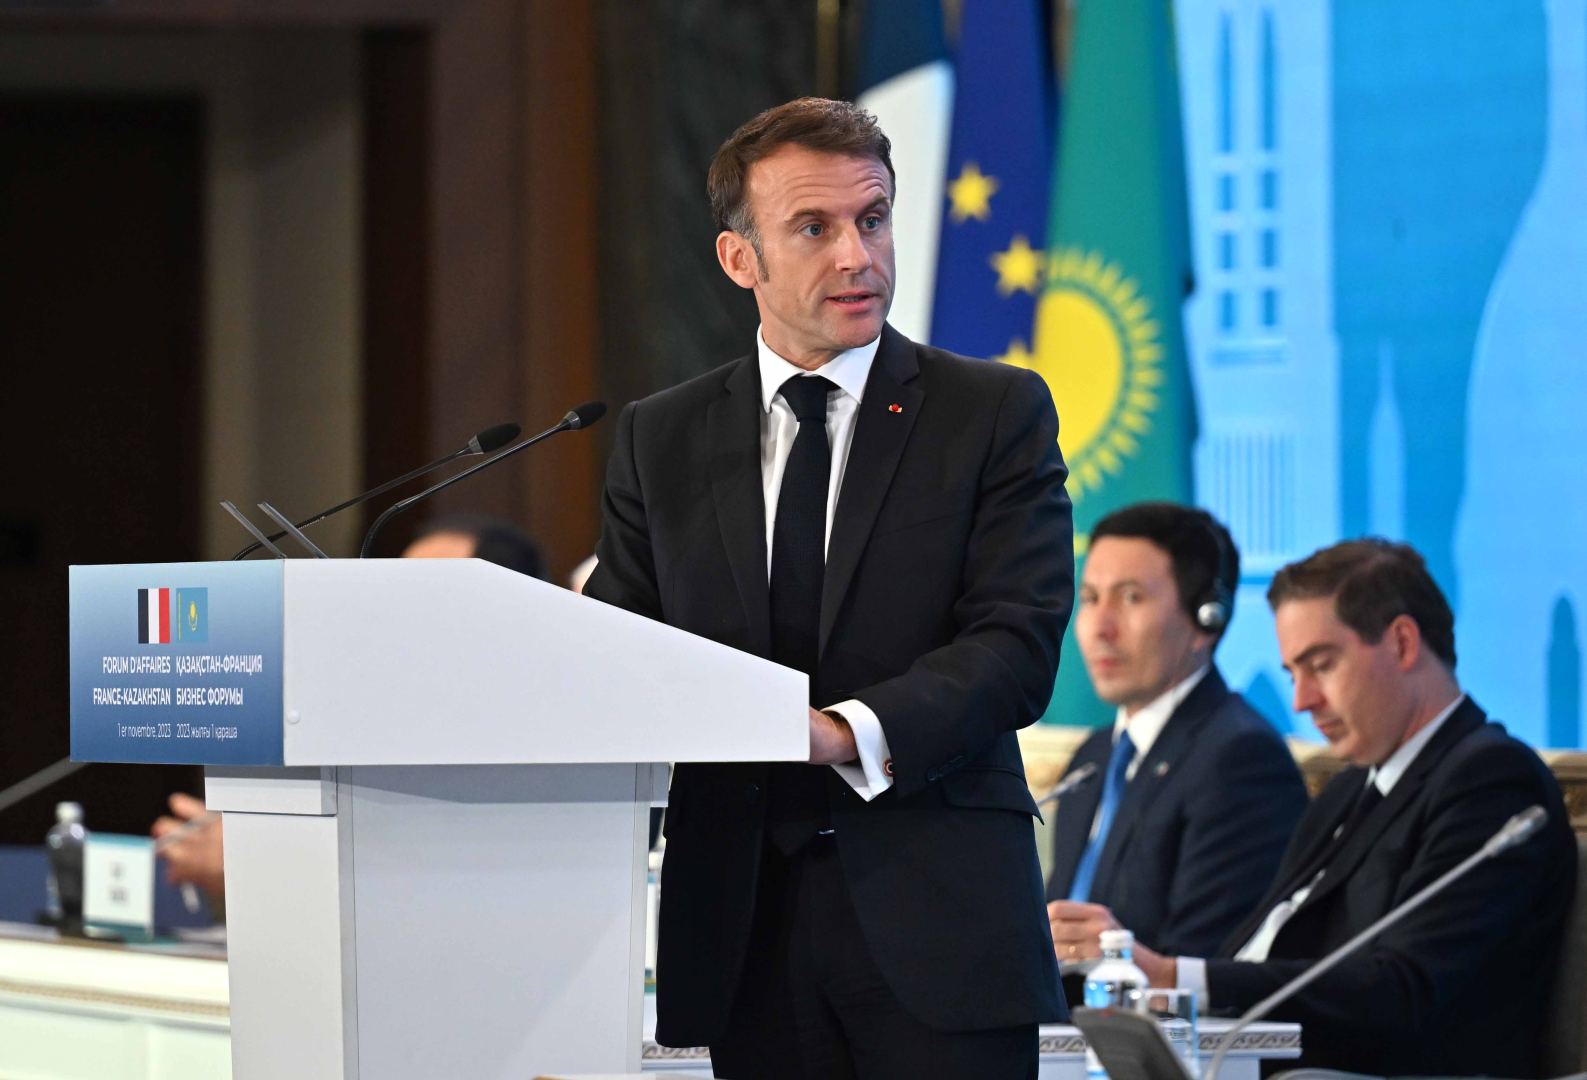 France intends to contribute to dev't of Middle Corridor - president